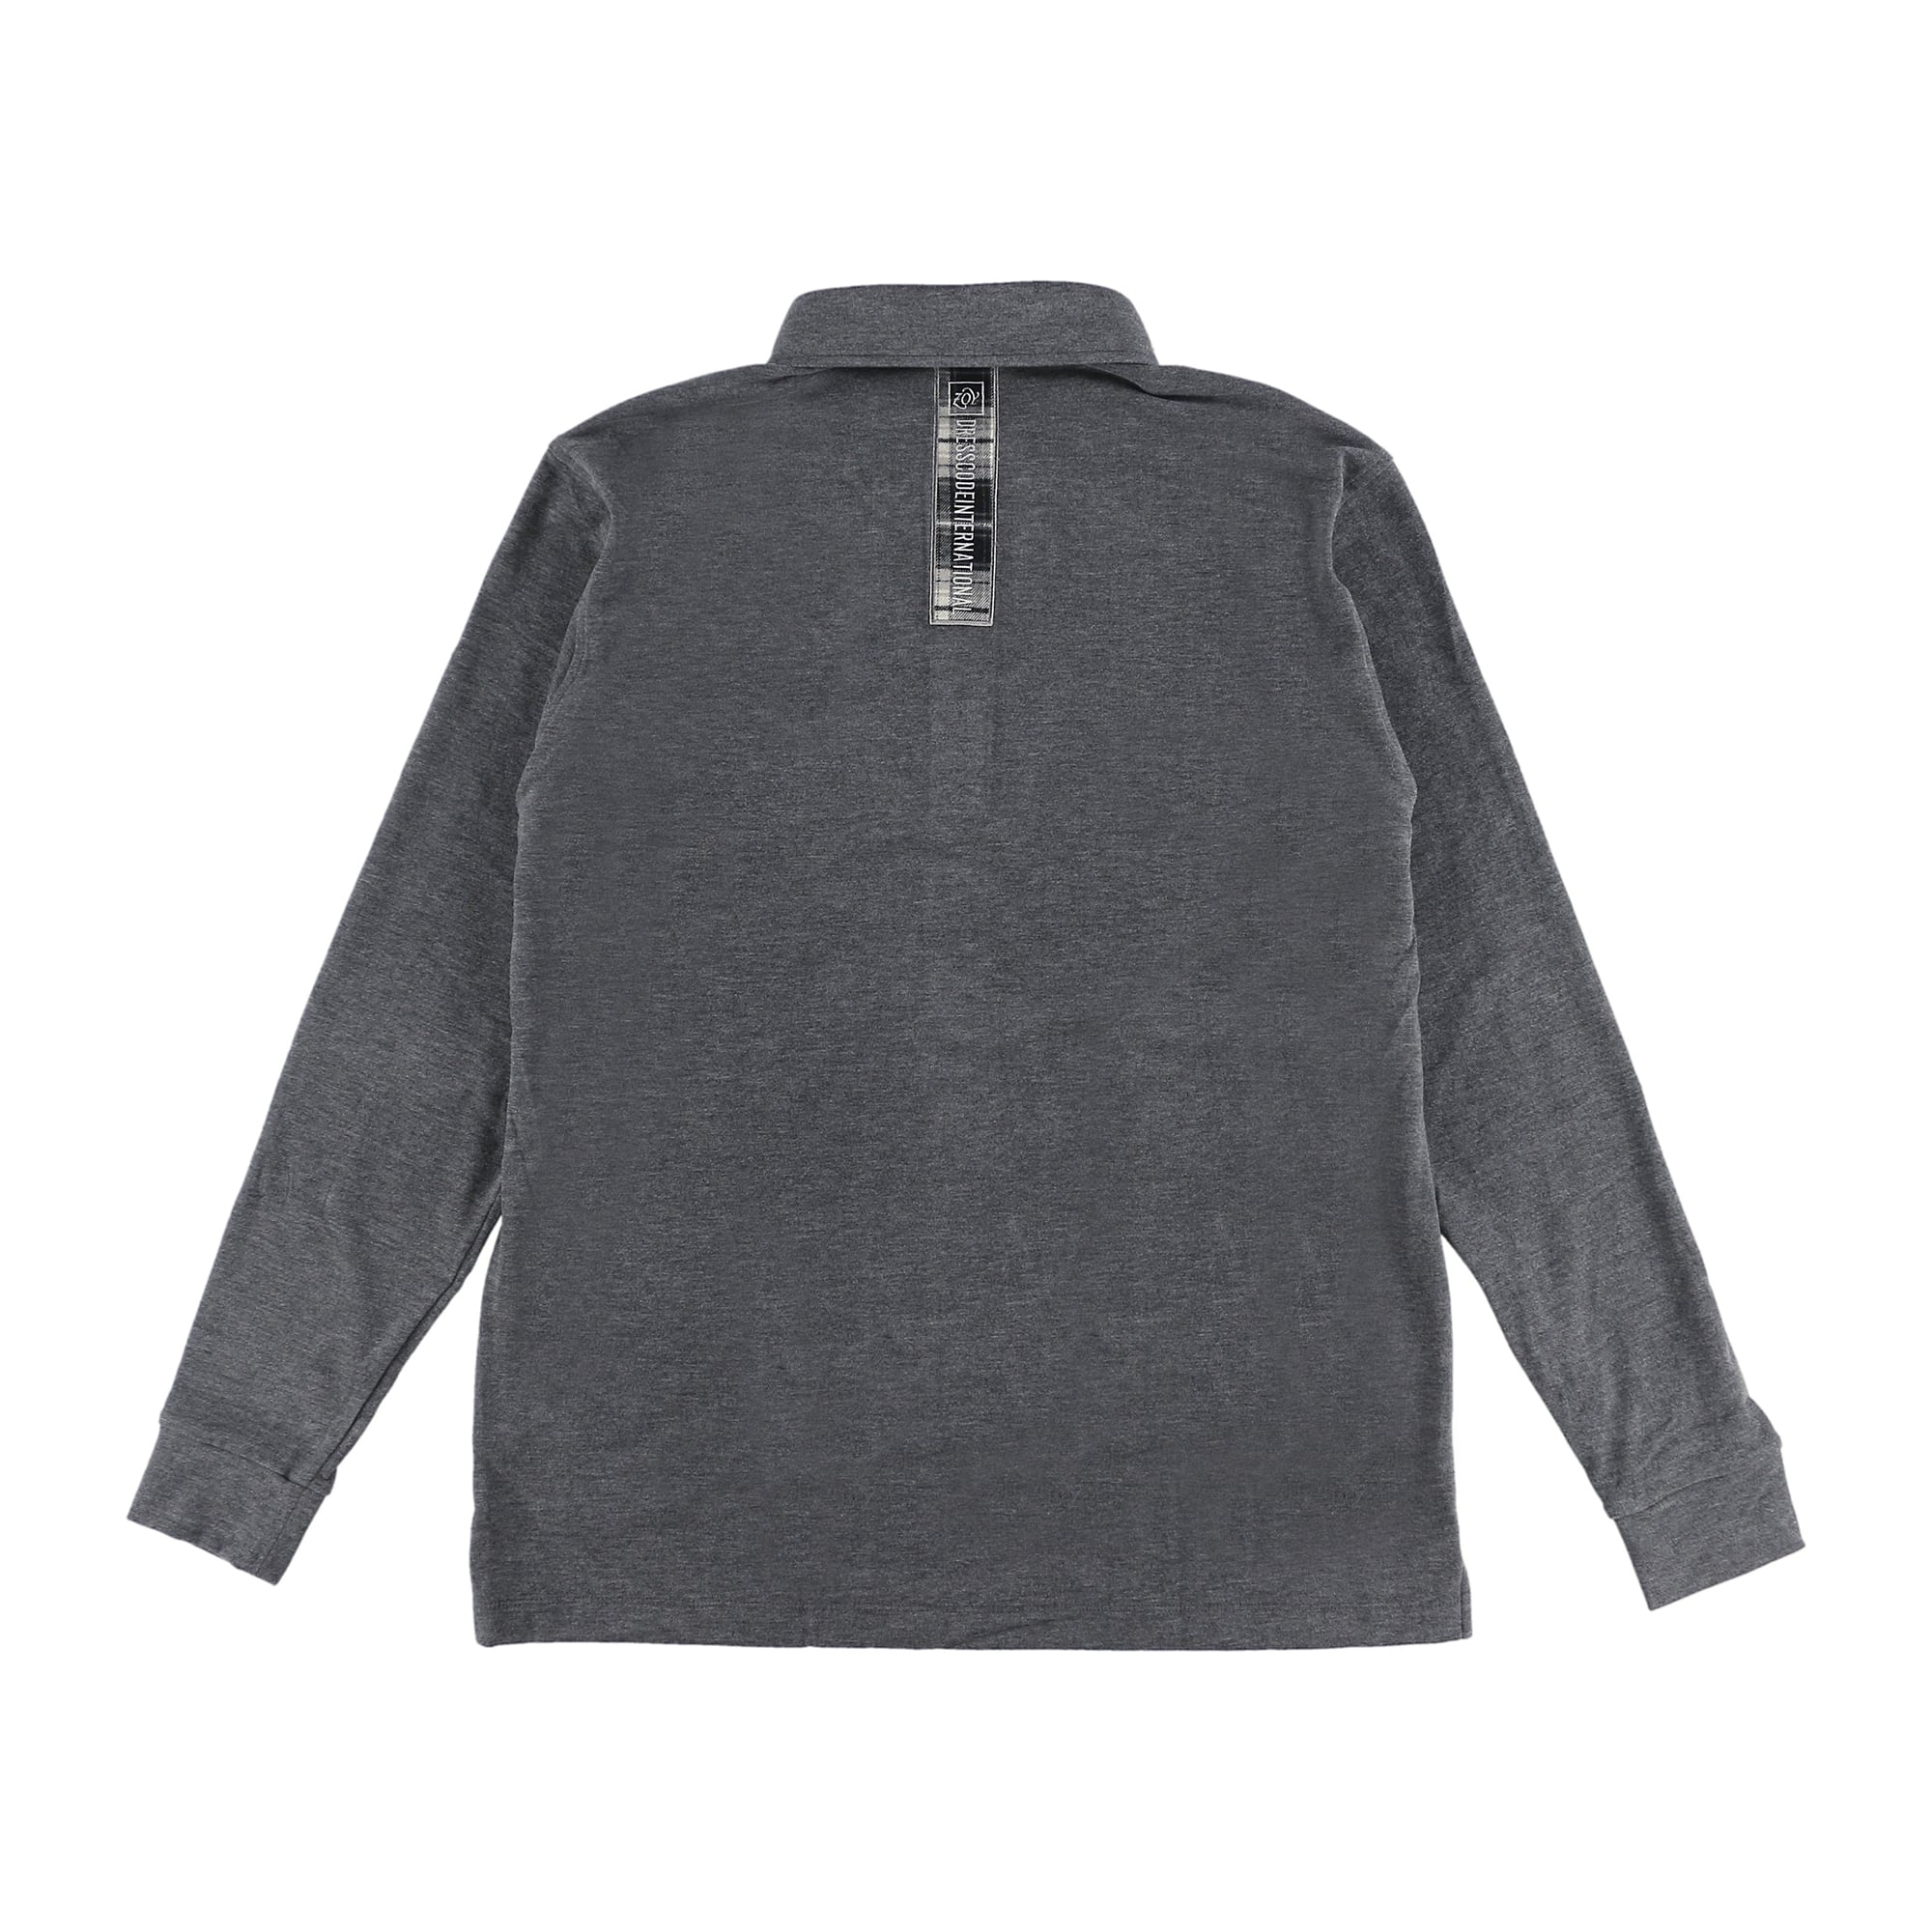 MENS 3LAYERED COTTON WARM 長袖シャツ 071424015 - ZOY OFFICIAL